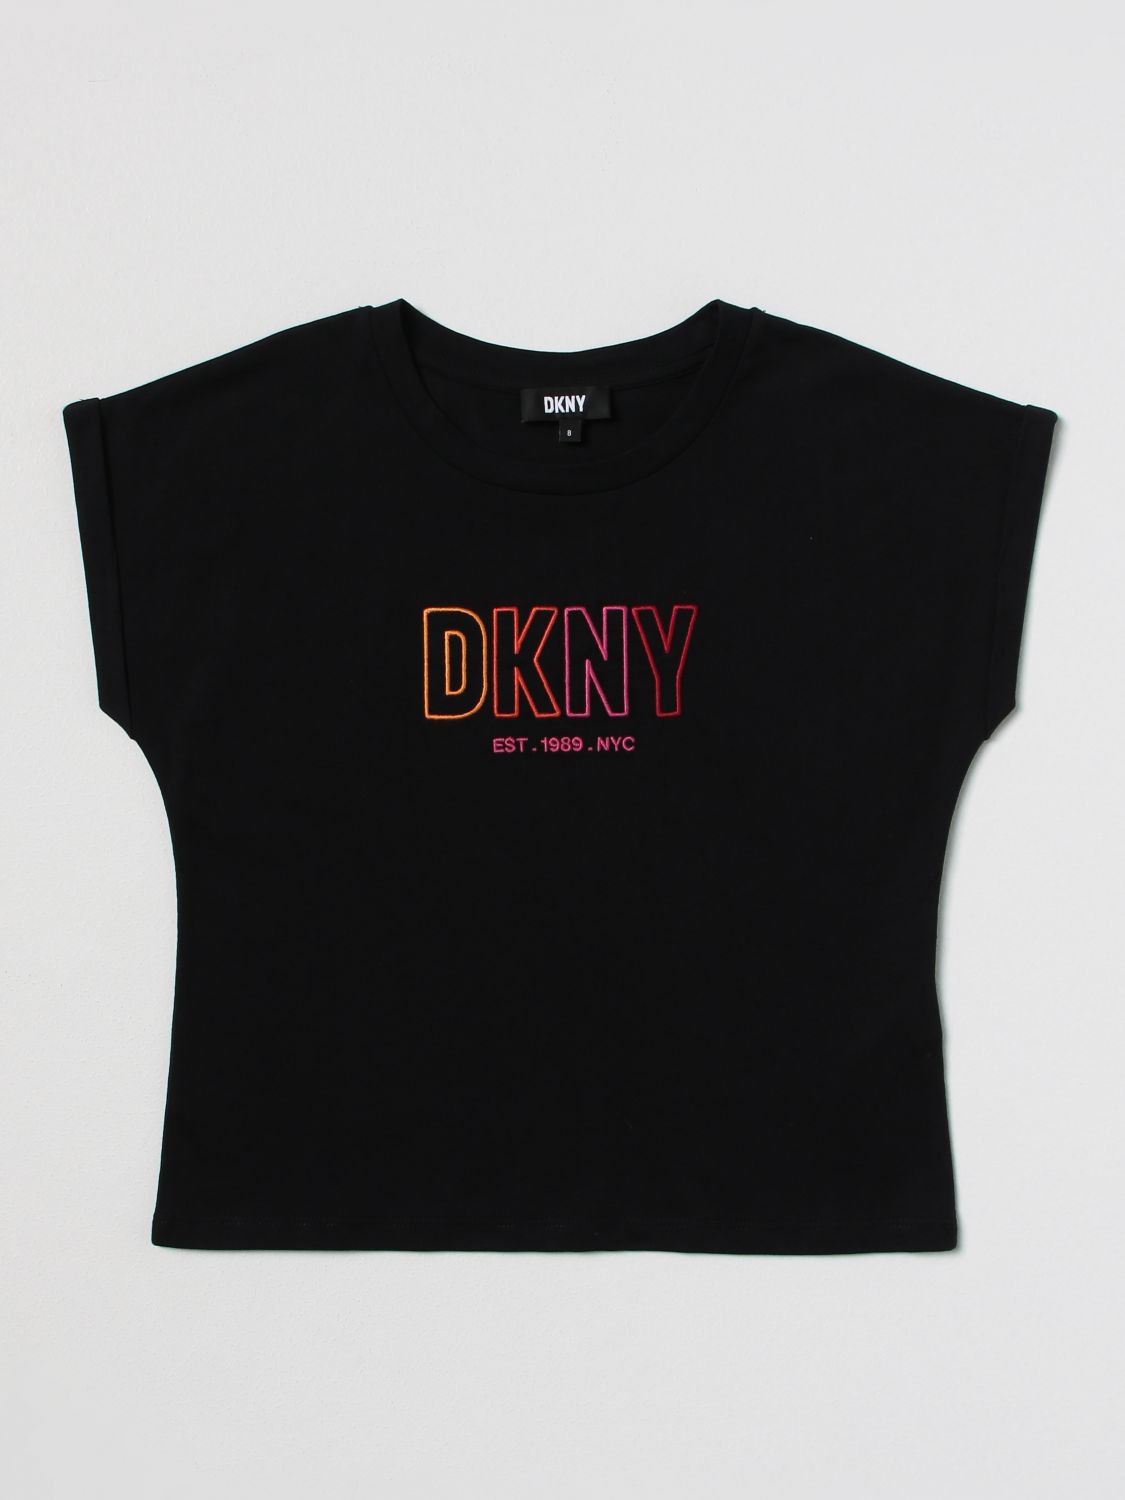 Dkny Outlet: t-shirt for girls - Black | Dkny t-shirt D35S82 online at ...